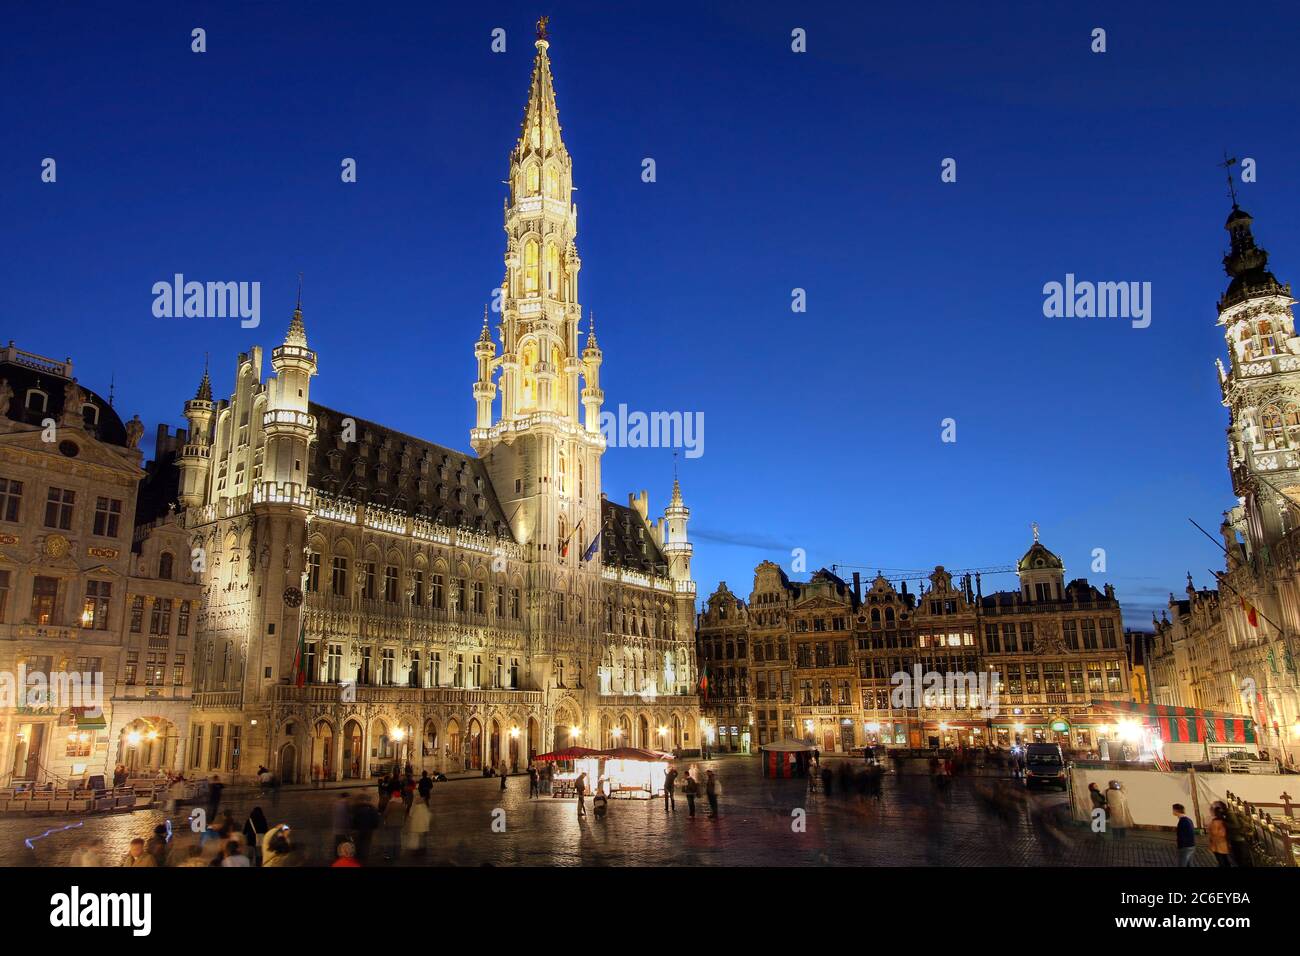 Wide angle night scene of the Grand Plance, the focal point of Brussels, Belgium. The townhall (Hotel de Ville) is dominating the composition Stock Photo